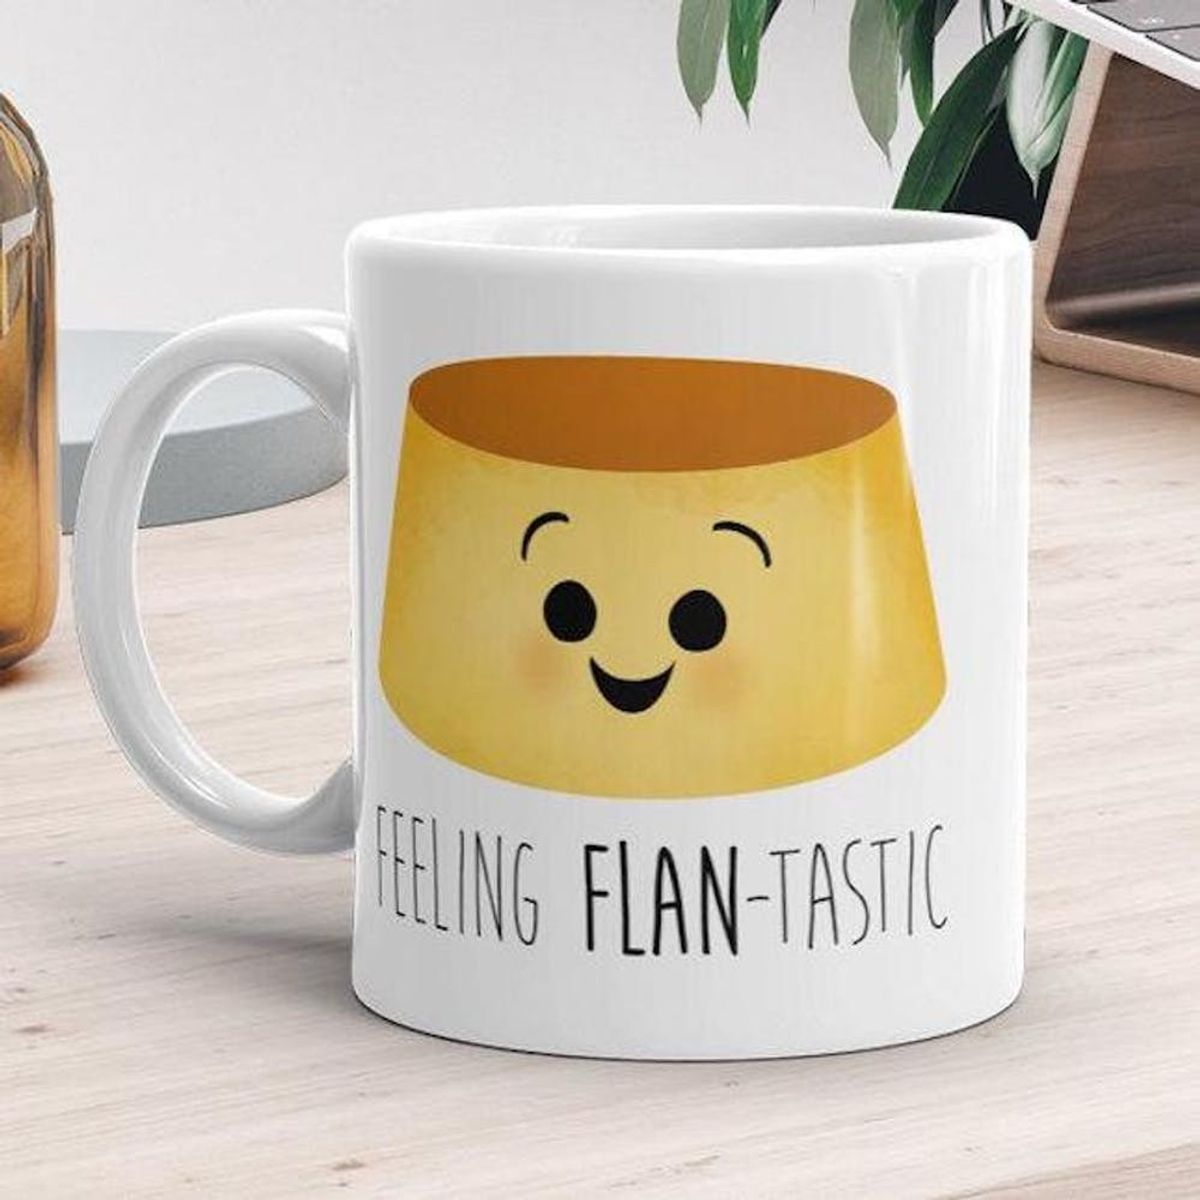 11 Funny Gifts for People Who Love Food